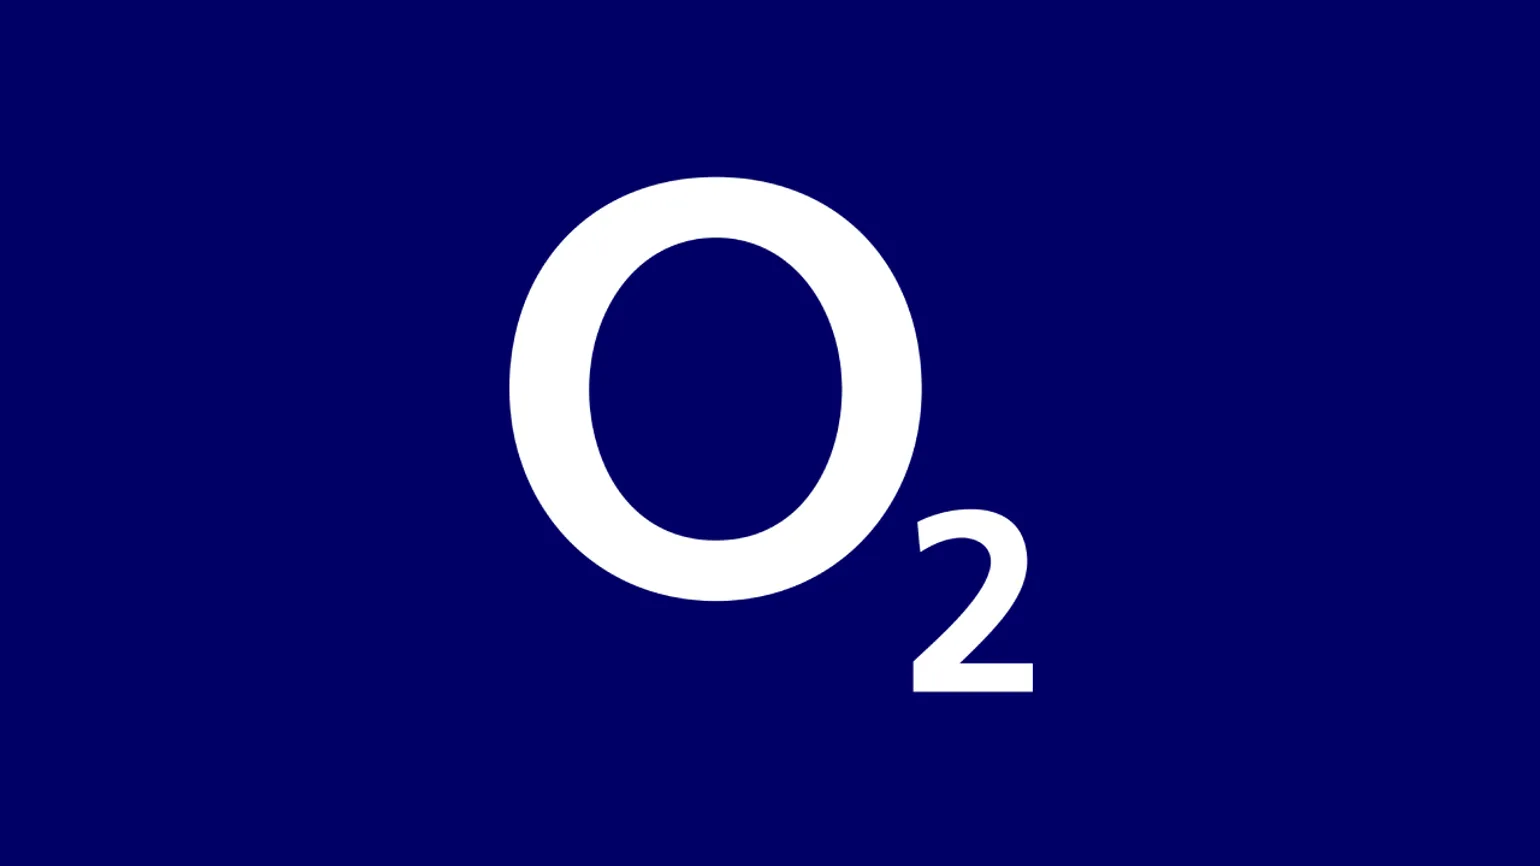 O2 price increases